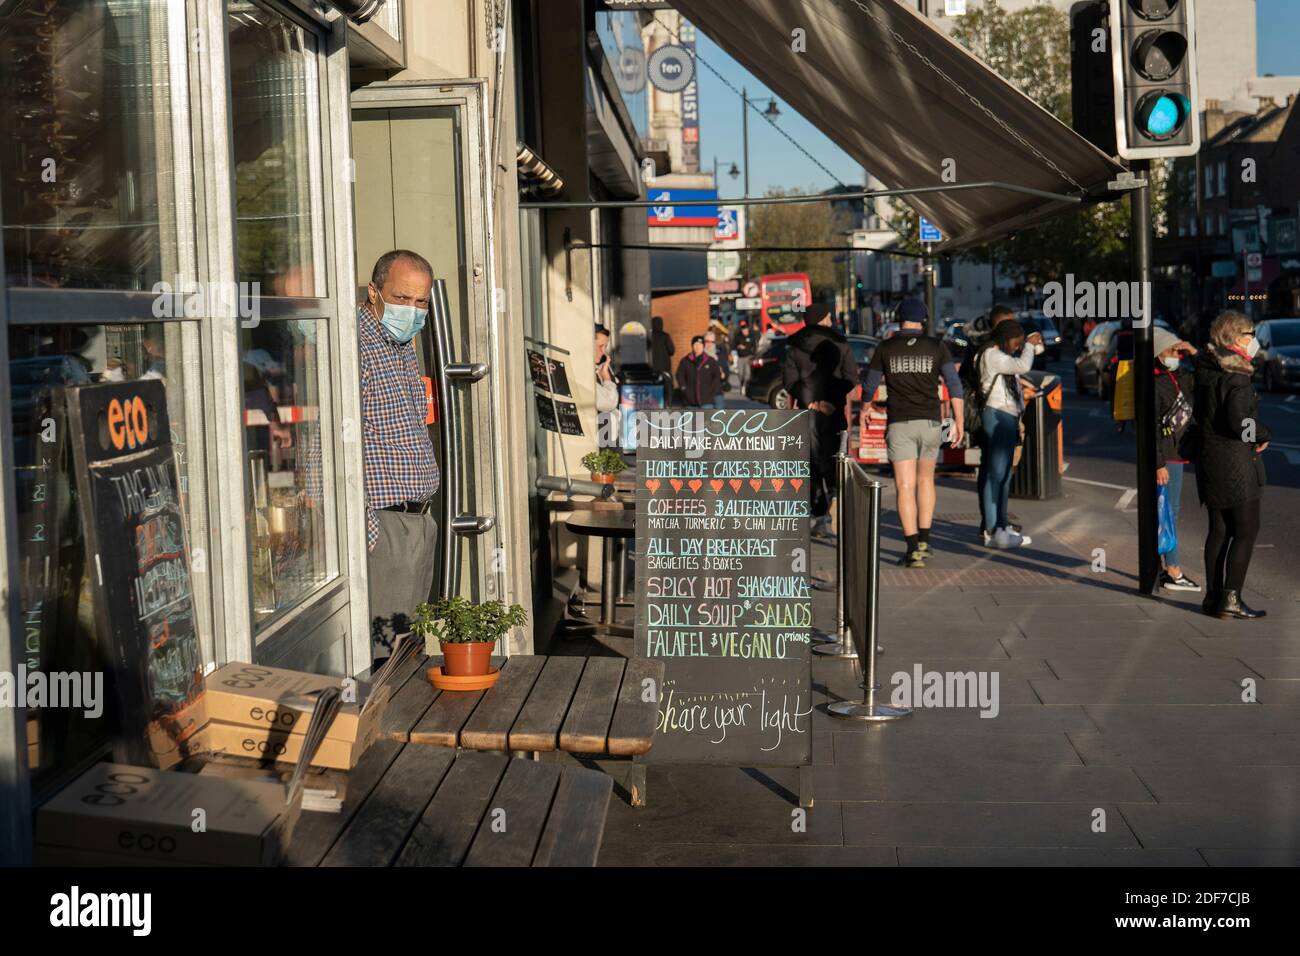 A man wearing a facemark on Clapham High Street on the 6th November in the London borough of Lambeth in the United Kingdom. Photo by Sam Mellish Stock Photo